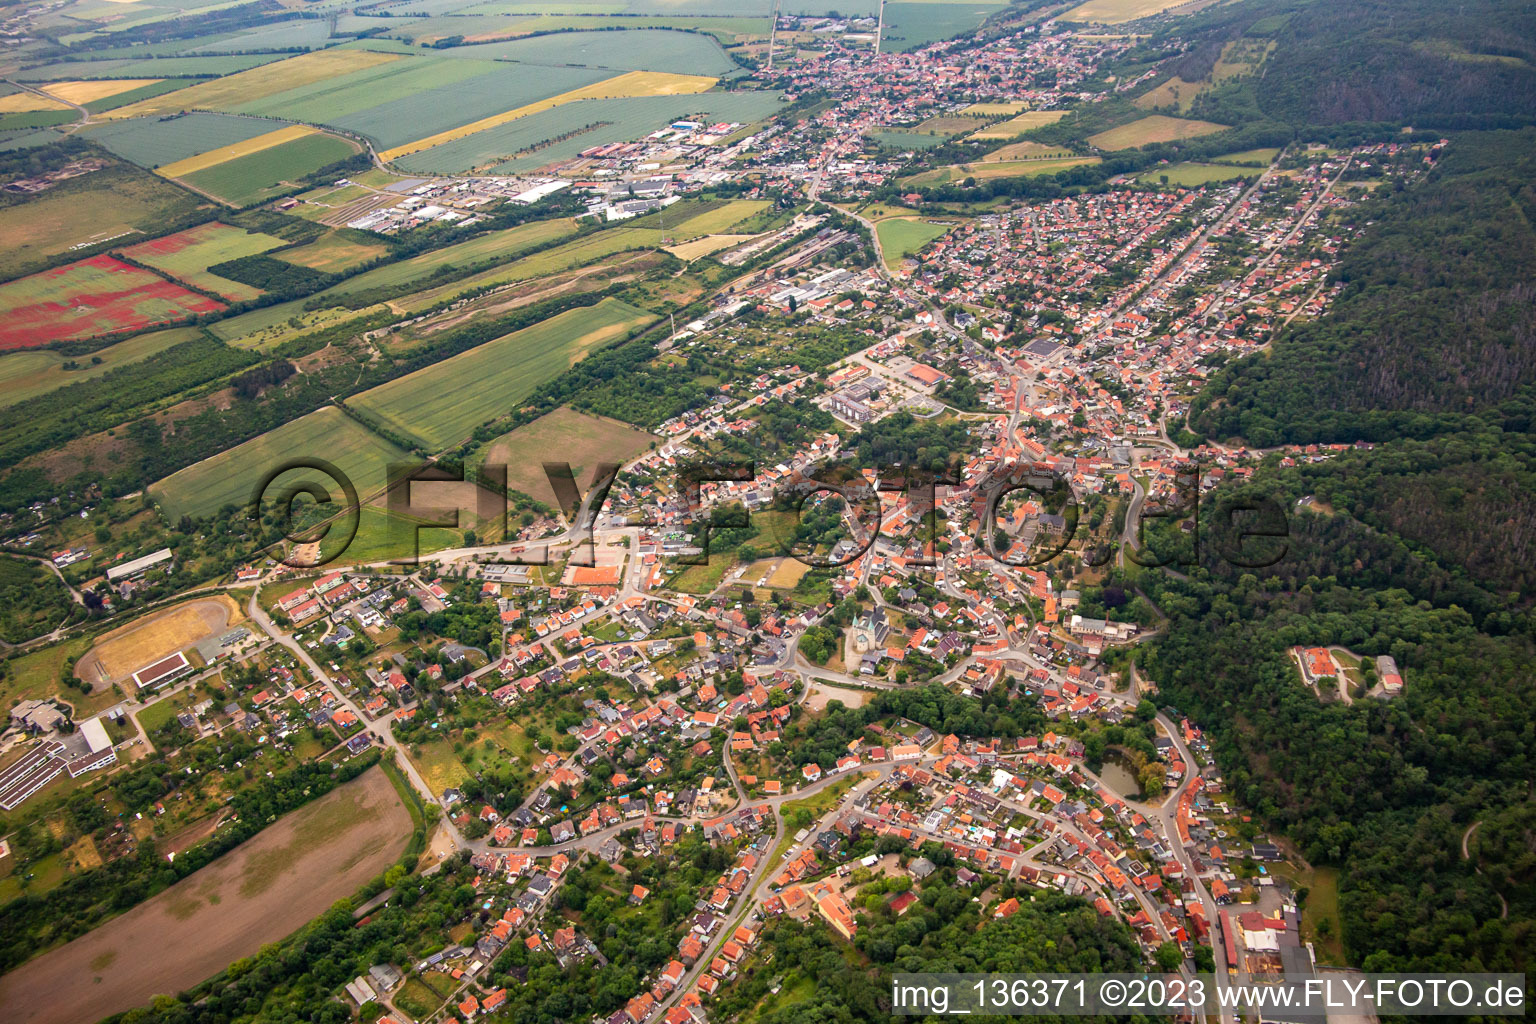 From the southwest in the district Gernrode in Quedlinburg in the state Saxony-Anhalt, Germany